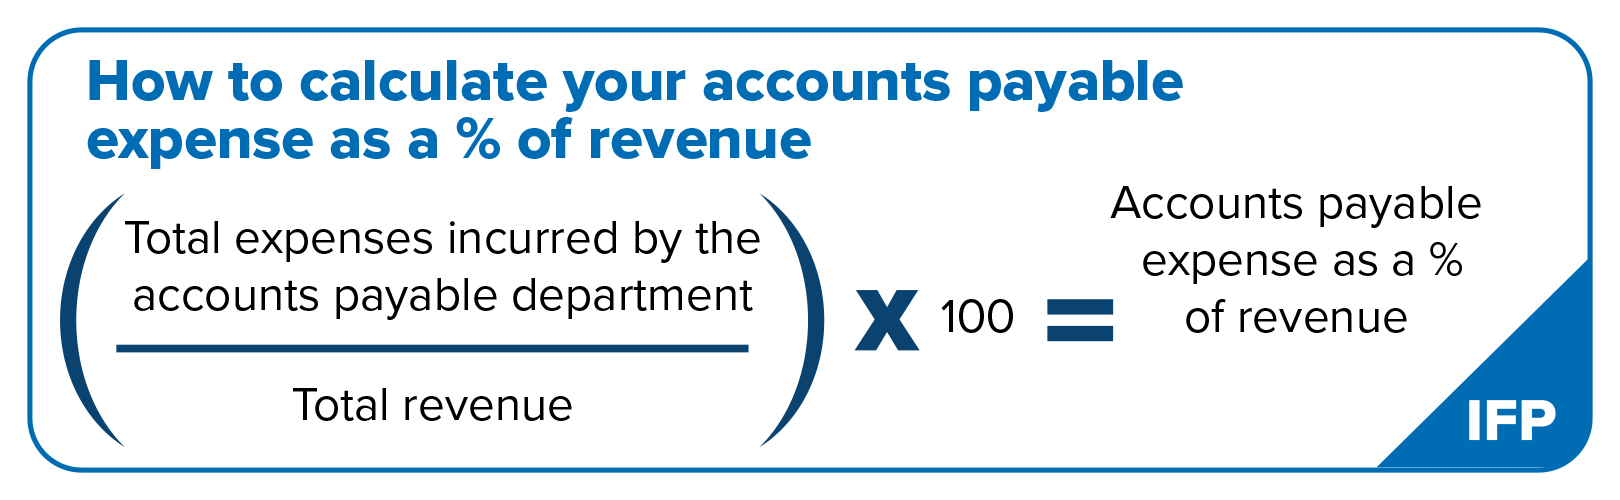 IFP visual showing how to calculate accounts payable as a percentage of revenue